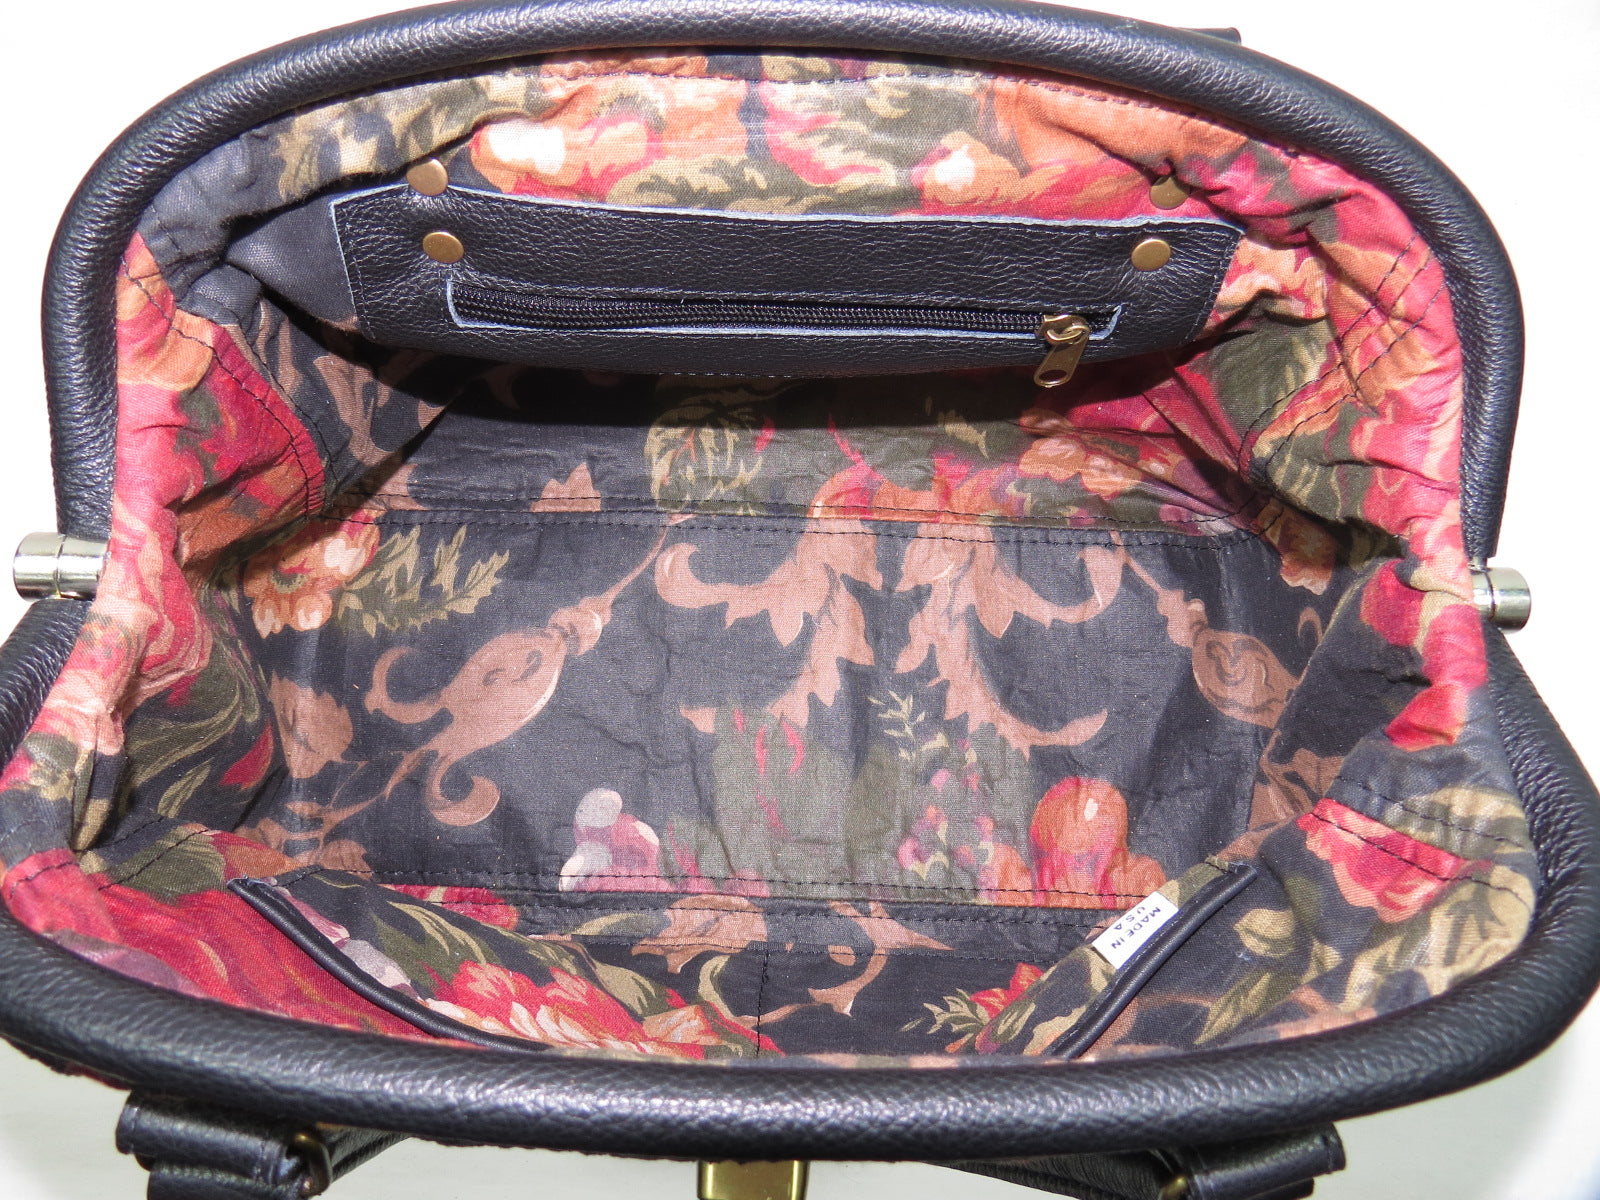 Black Leather and Tapestry Mary Poppins Doctor Bag interior zipper pocket